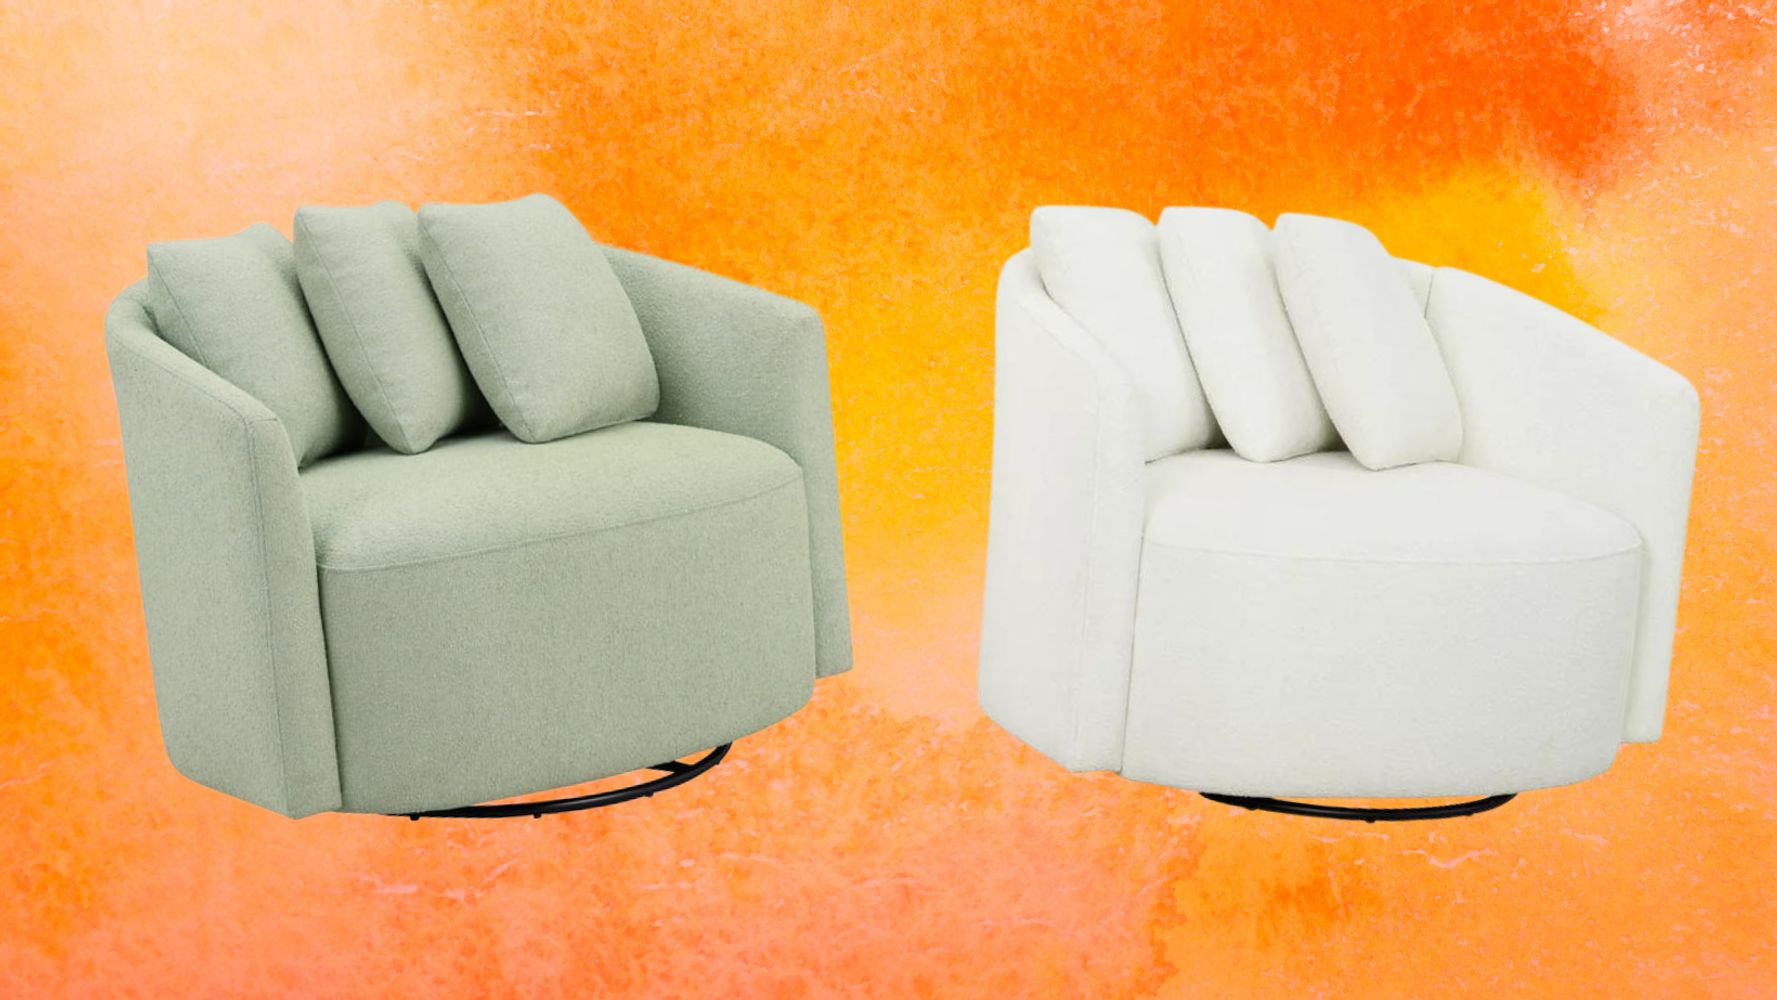 The Walmart Swivel Chair That's Racking Up Rave Reviews